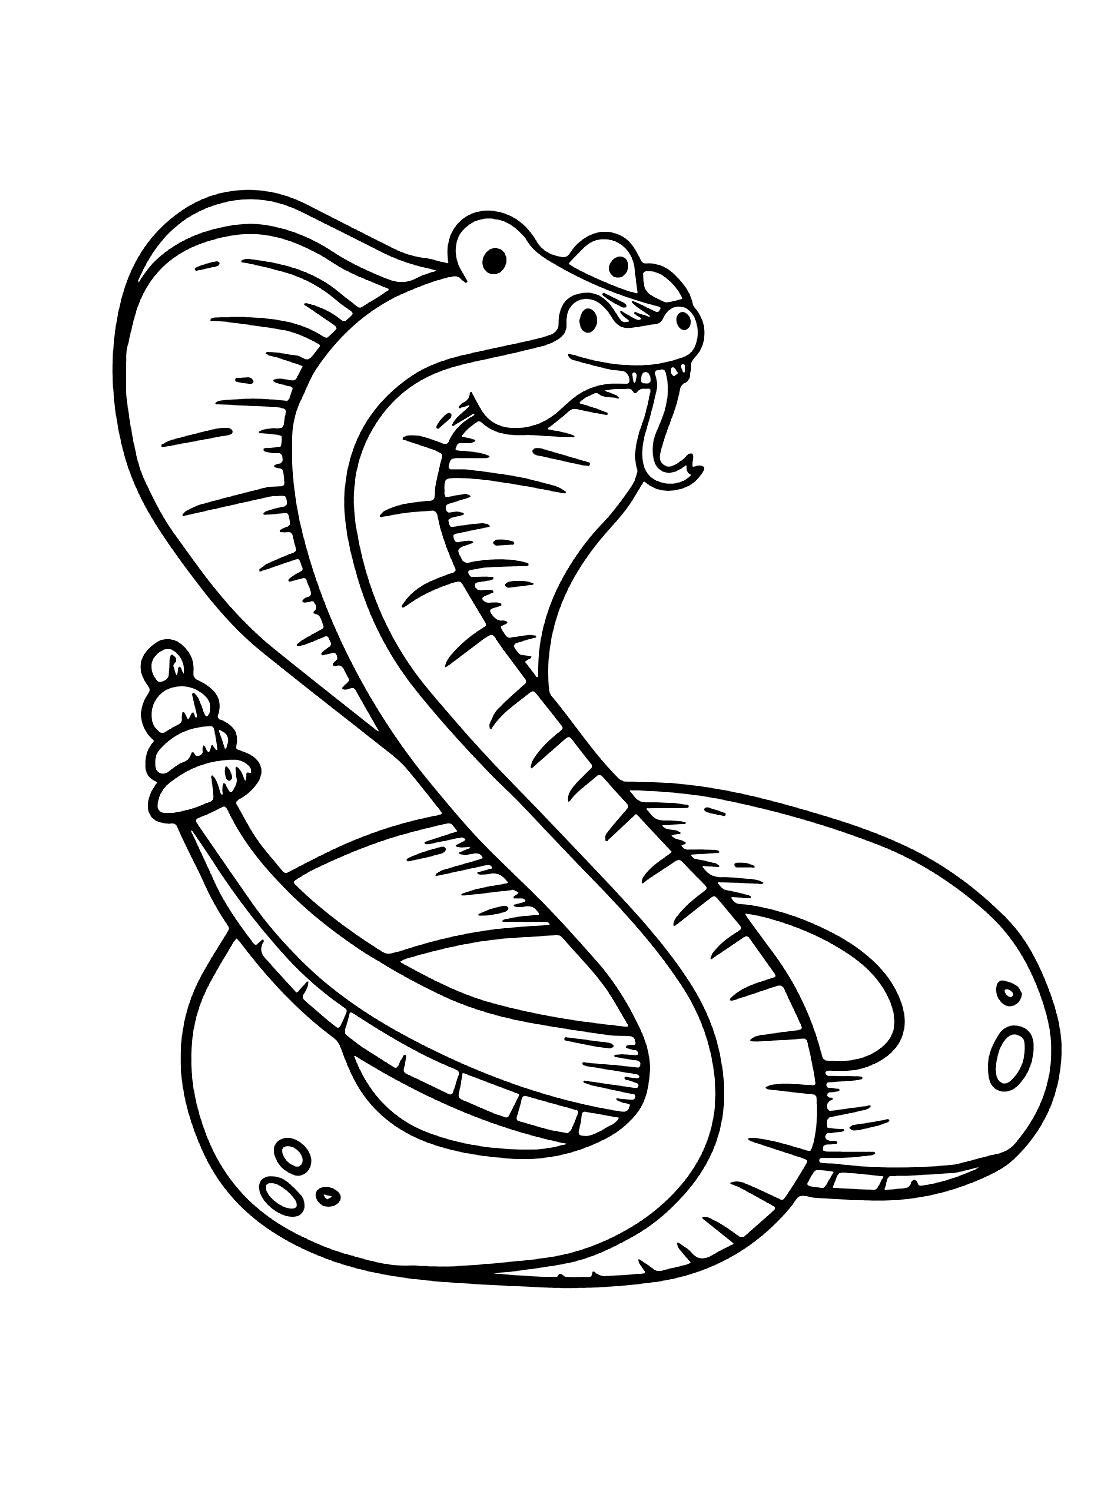 Picture of a snake to color